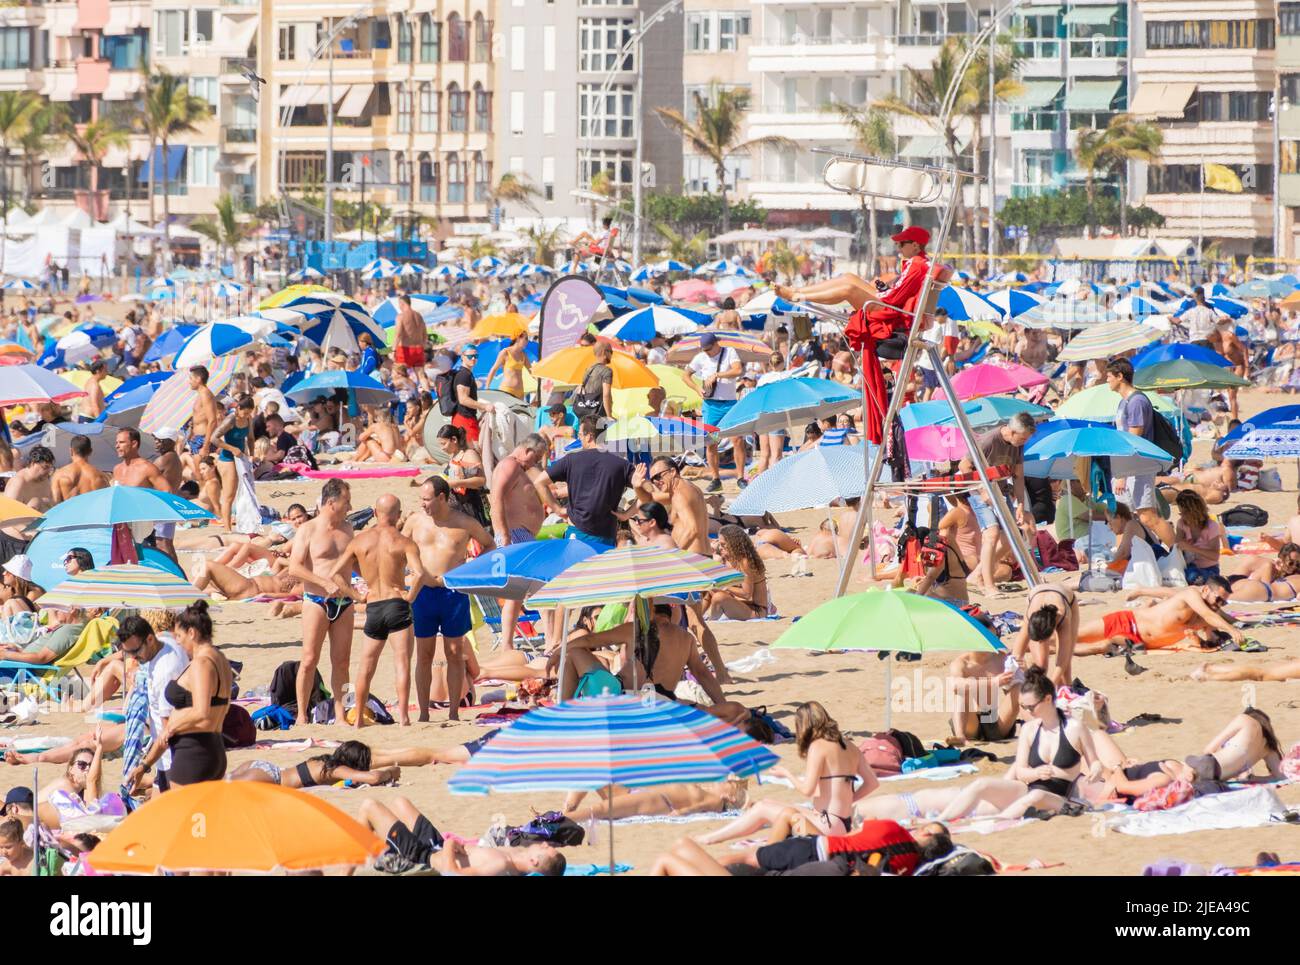 Las Palmas, Gran Canaria, Canary Islands, Spain. 26th June, 2022. Tourists, many from the UK, bask on the city beach in Las Palmas on Gran Canaria. Credit: Alan Dawson/ Alamy Live News. Stock Photo